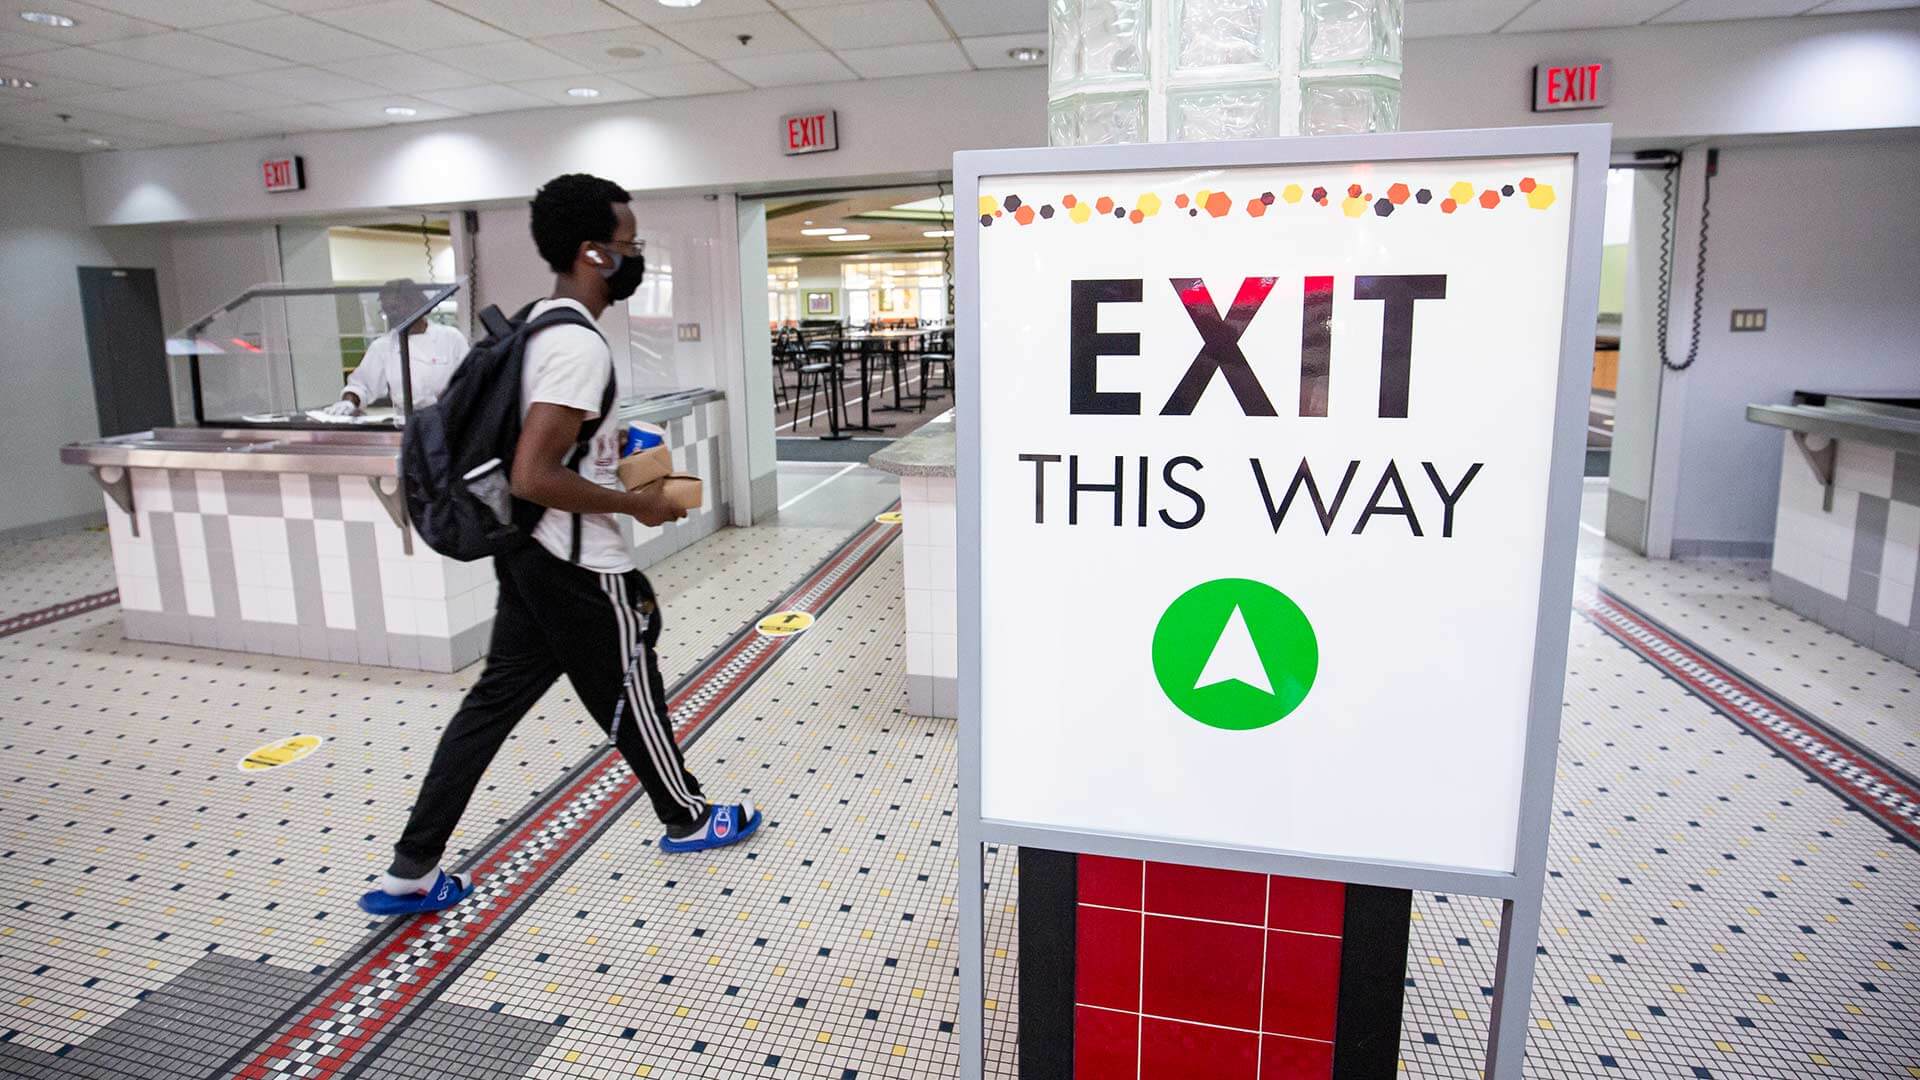 Student walking by "Exit this way" sign in dining hall